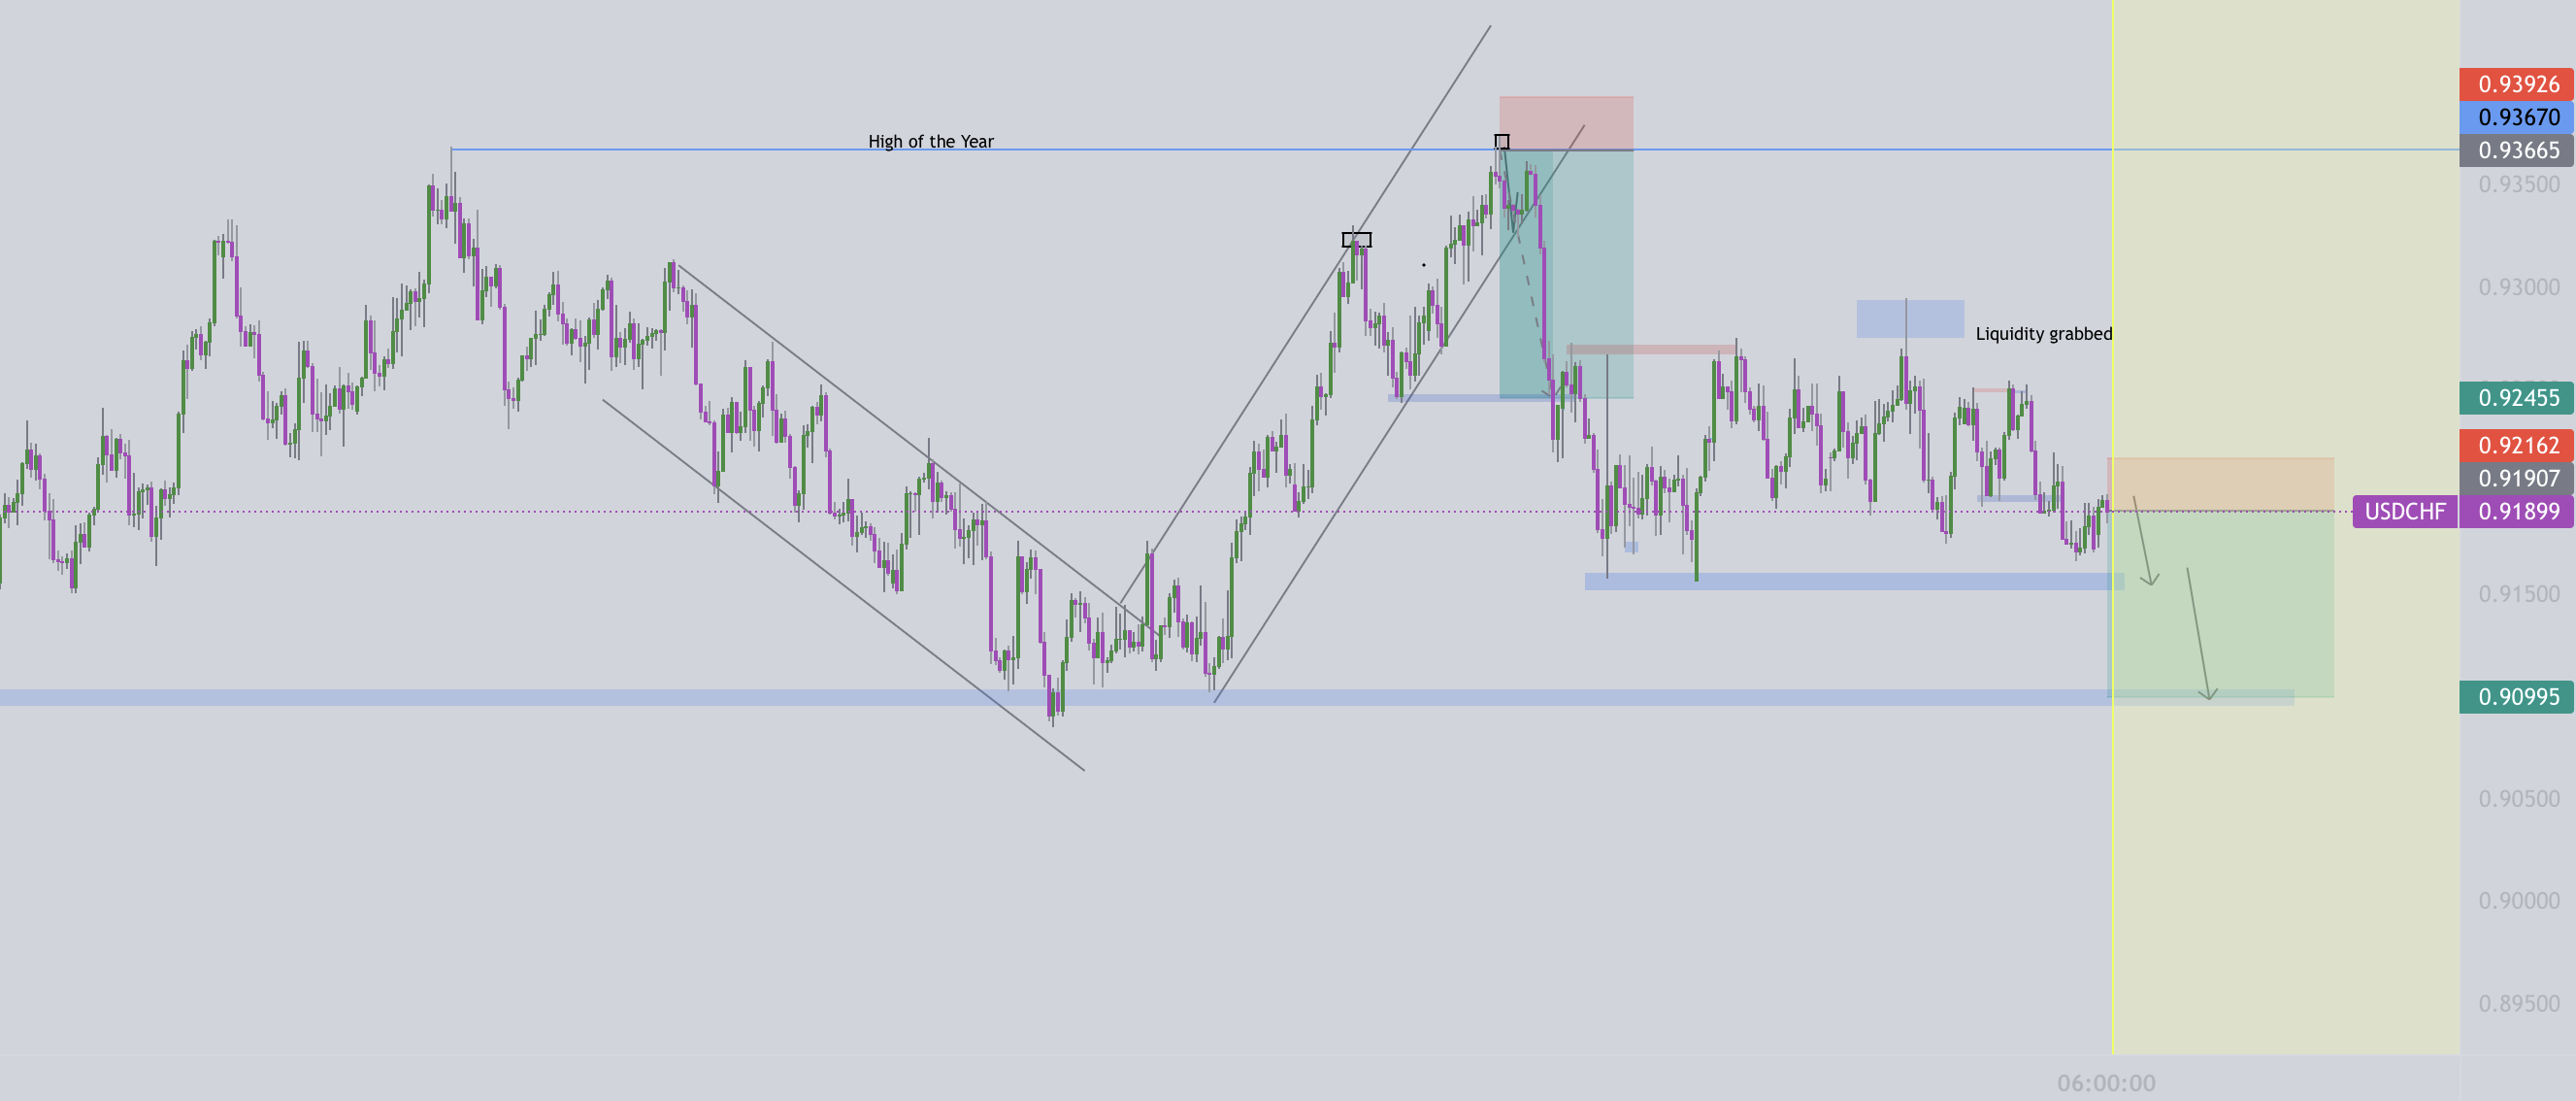 USDCHF: Potential break to the downside